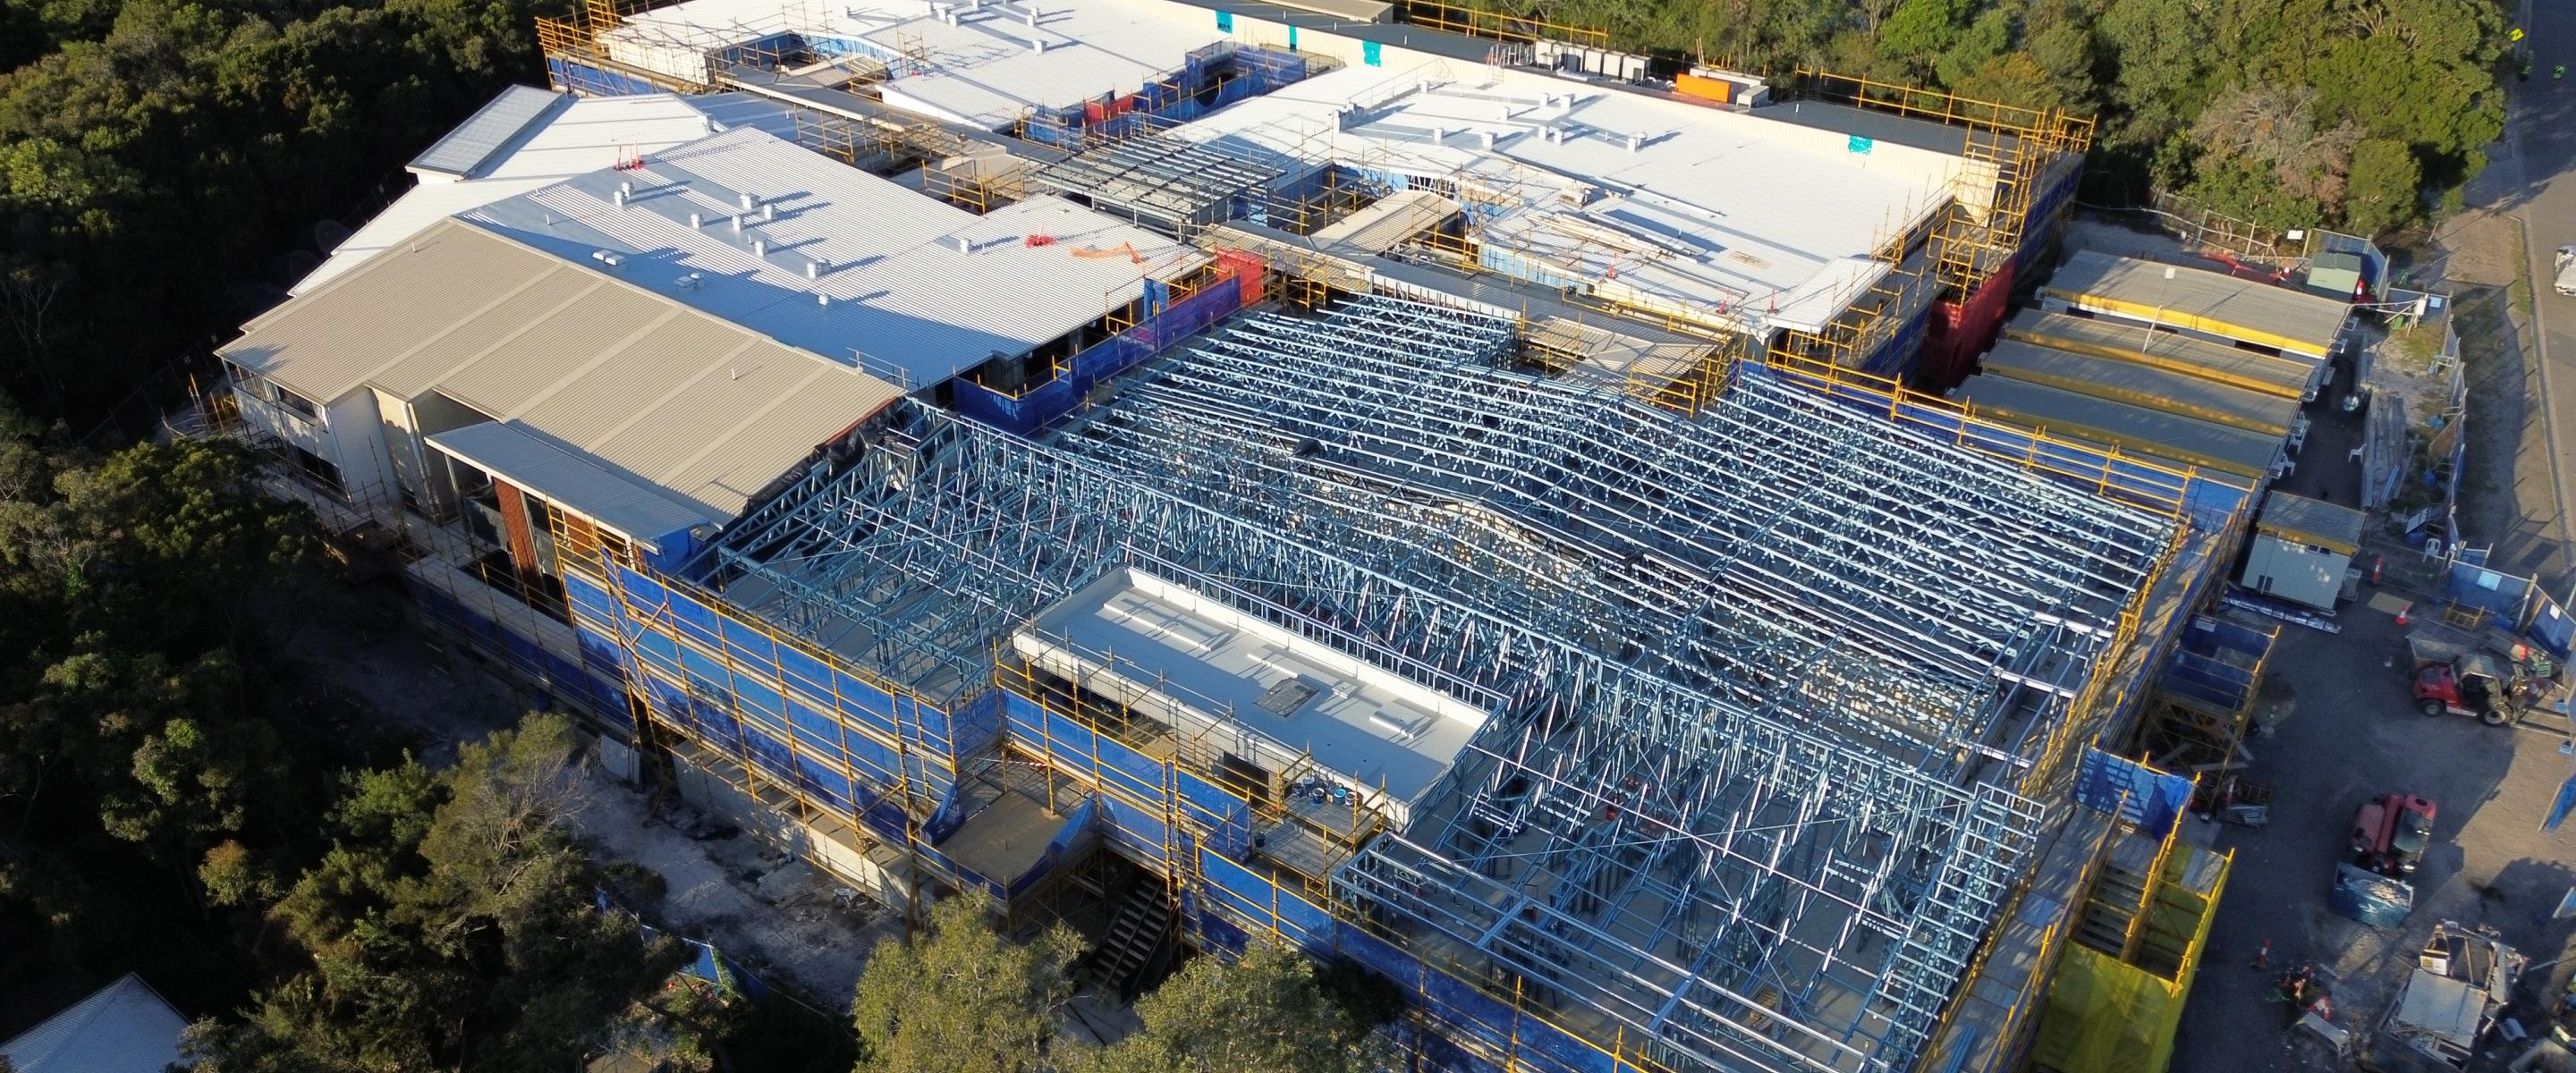 Designed and prefabricated off site, light gauge steel (LGS) framing made from TRUECORE® steel allows a critical aged care facility to be built on schedule and on budget